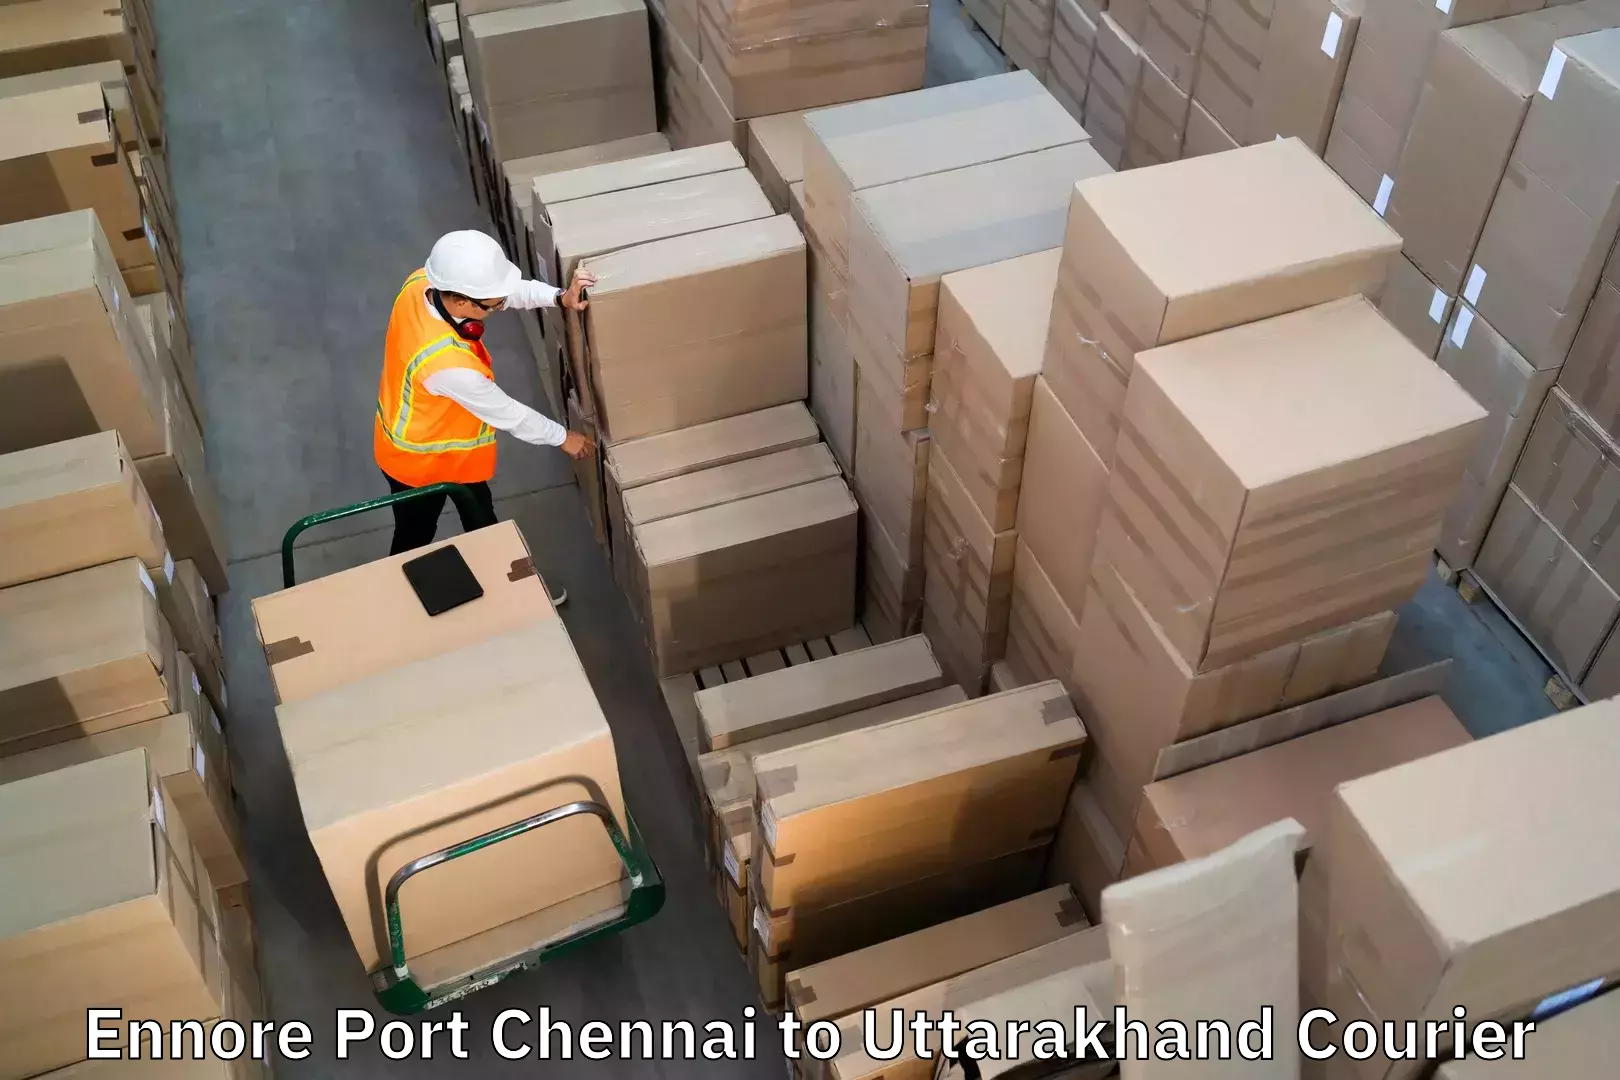 Baggage delivery scheduling in Ennore Port Chennai to Rishikesh